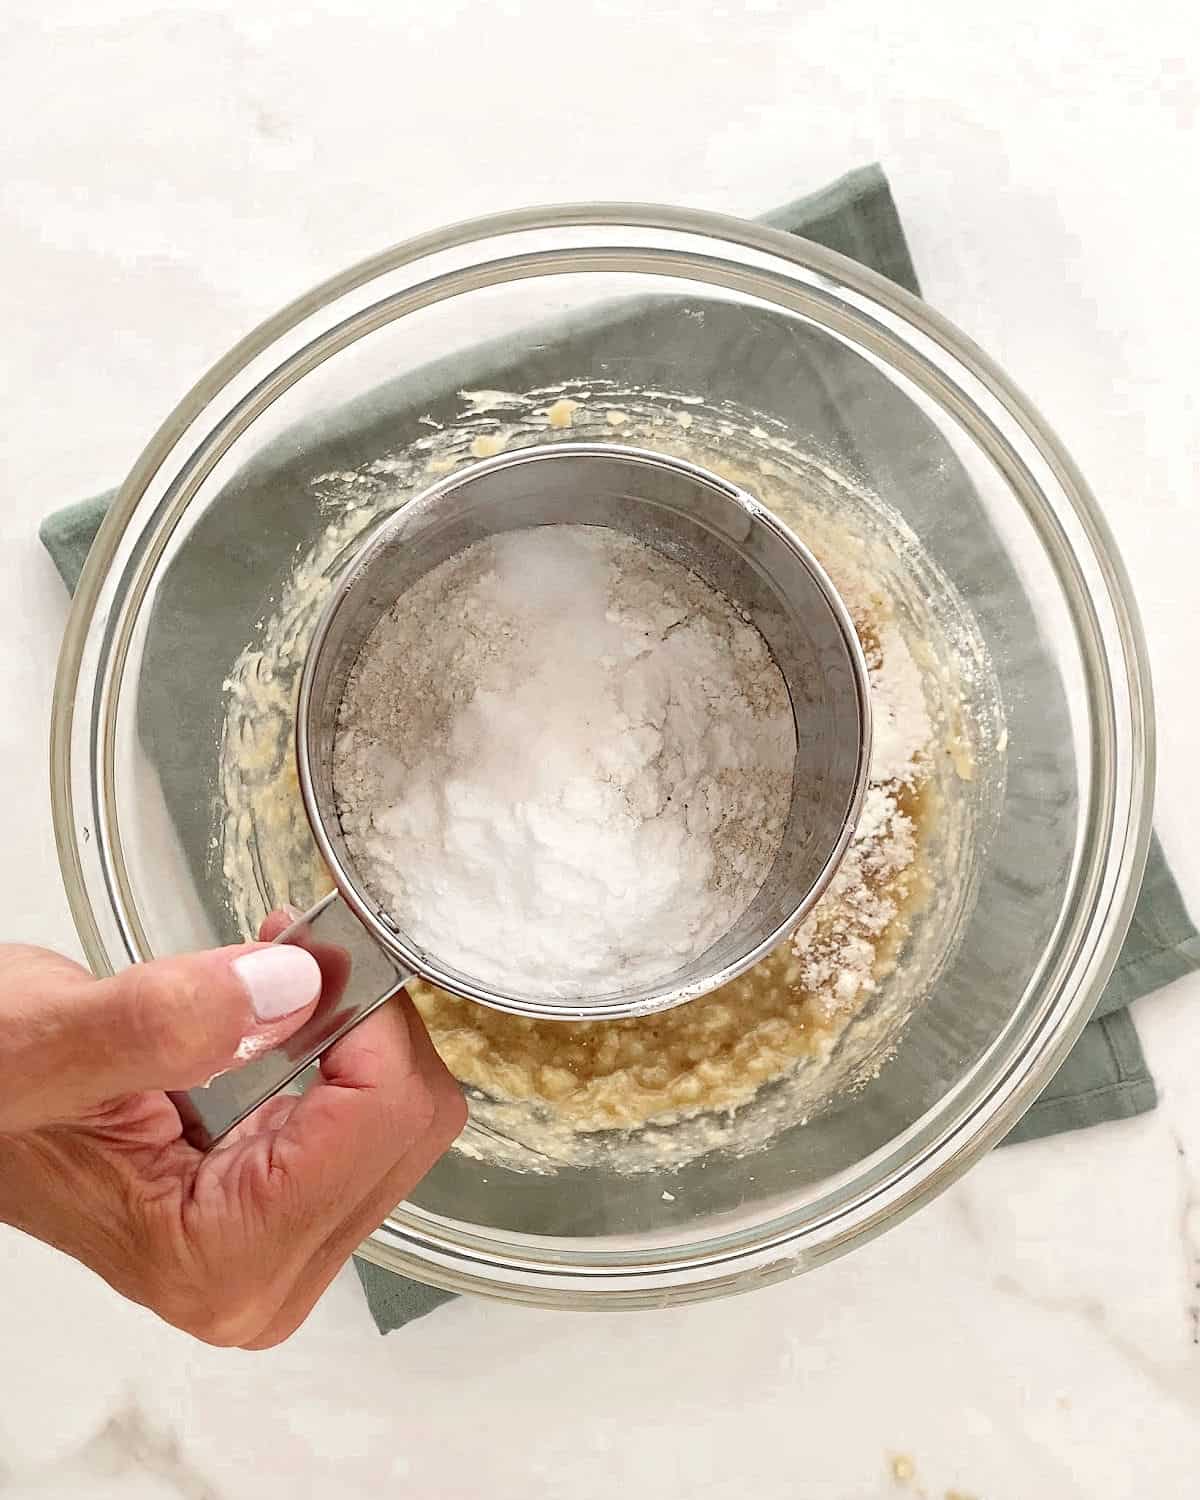 Sifting flour over banana muffin batter in a glass bowl. Green towel beneath it. White marble surface.